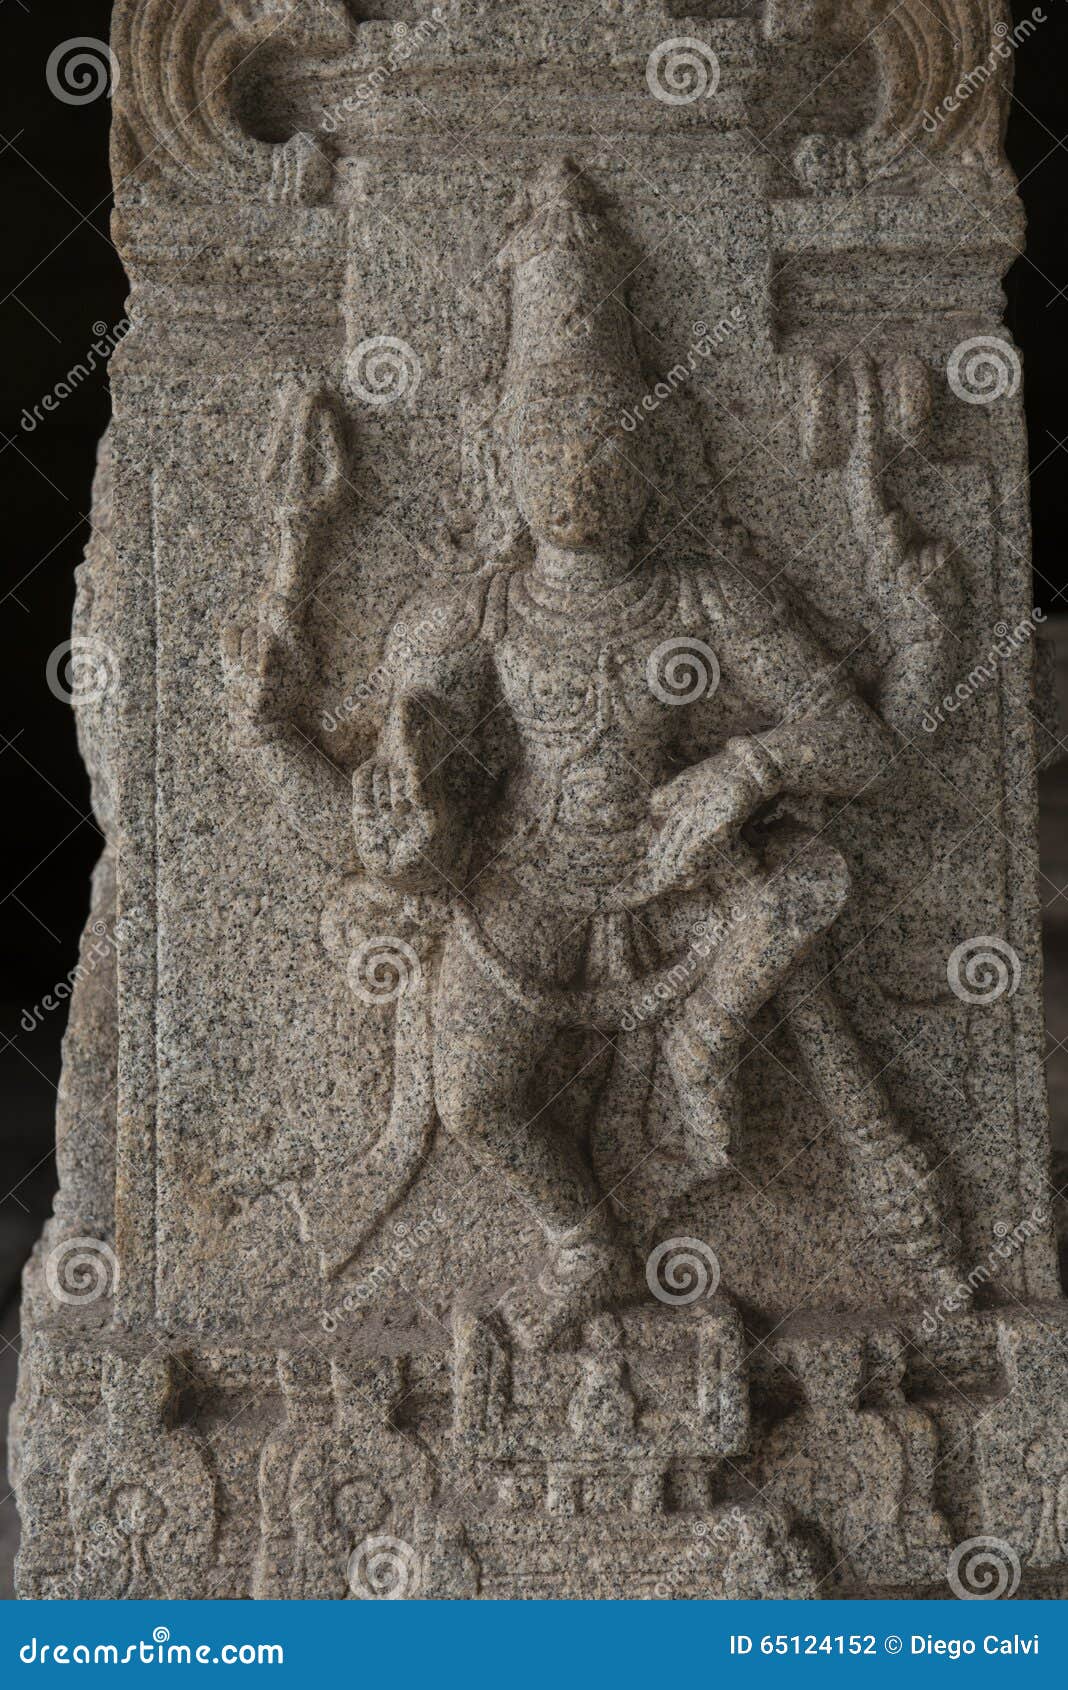 bas-relief detail of shiva